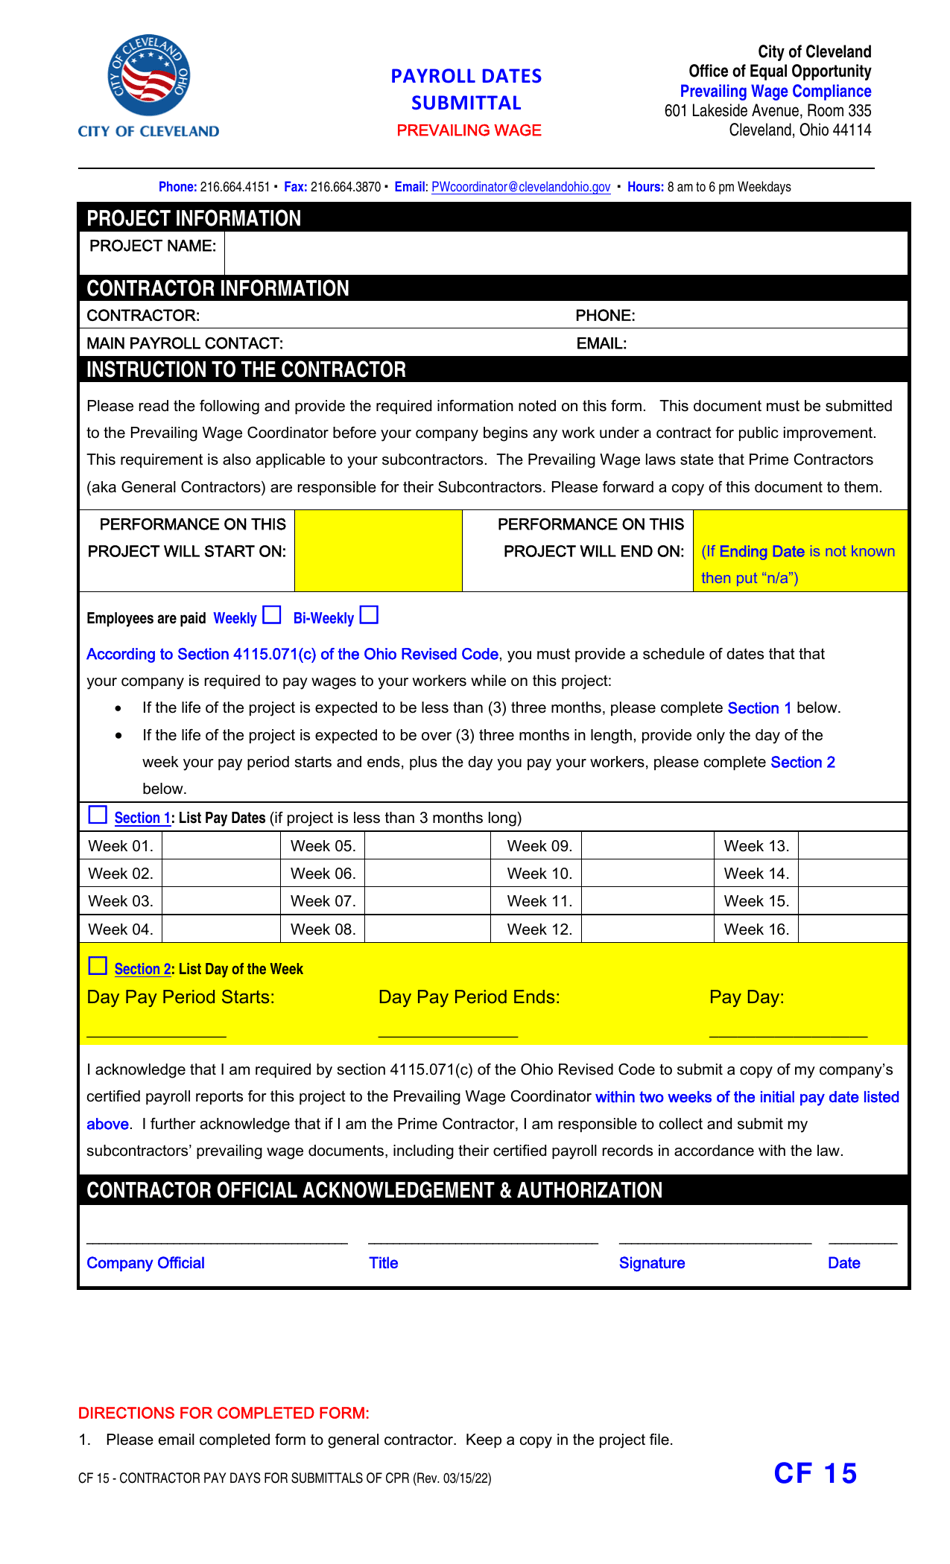 Form CF15 Contractor Pay Days for Submittals of Cpr - City of Cleveland, Ohio, Page 1